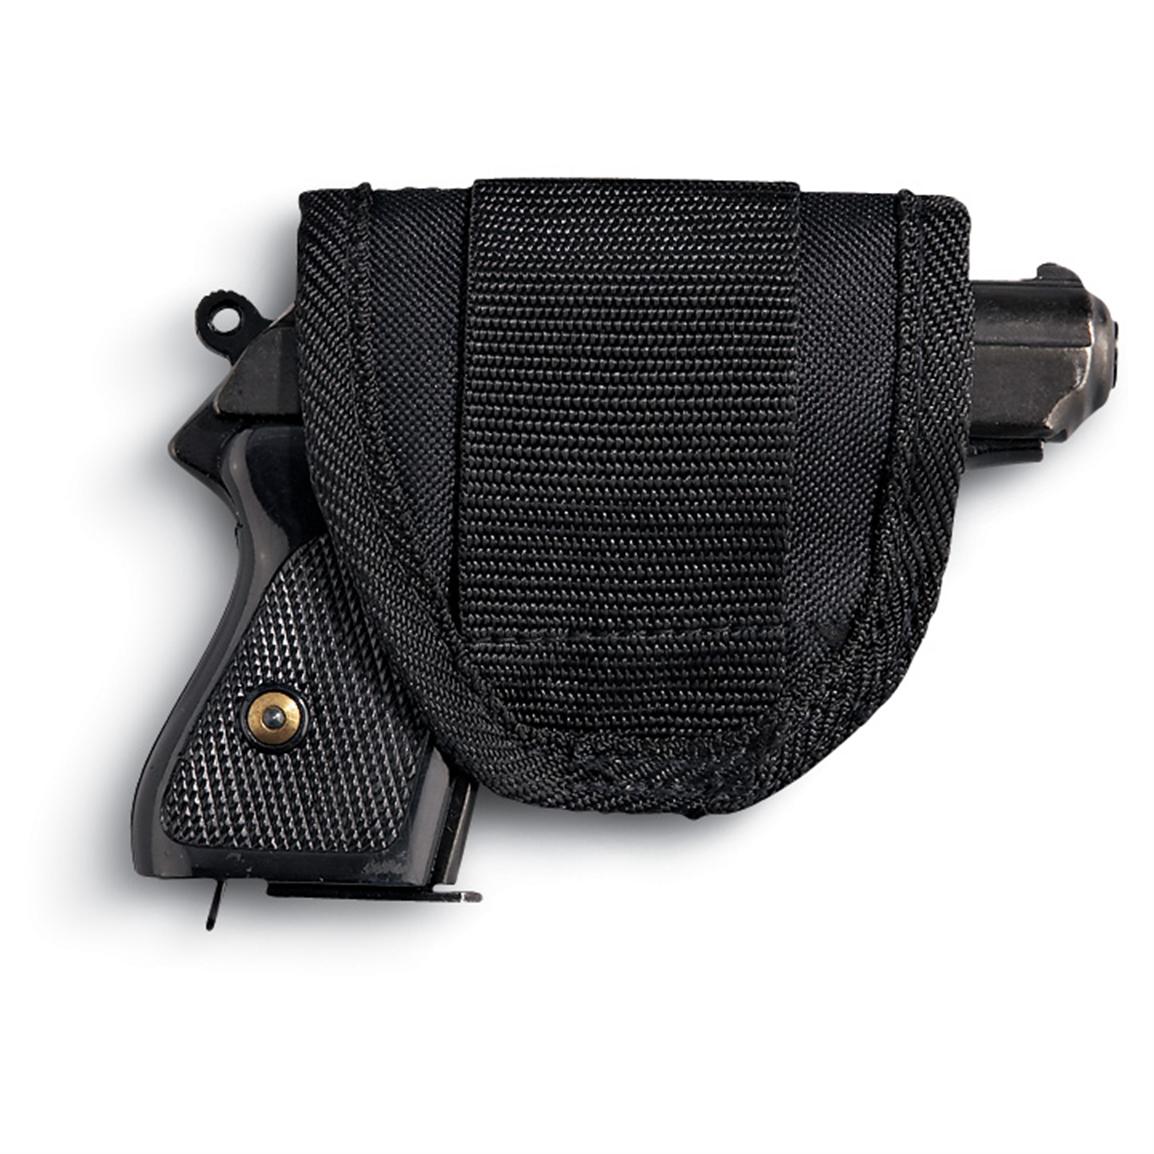 A super-durable, comfortable, compact carry